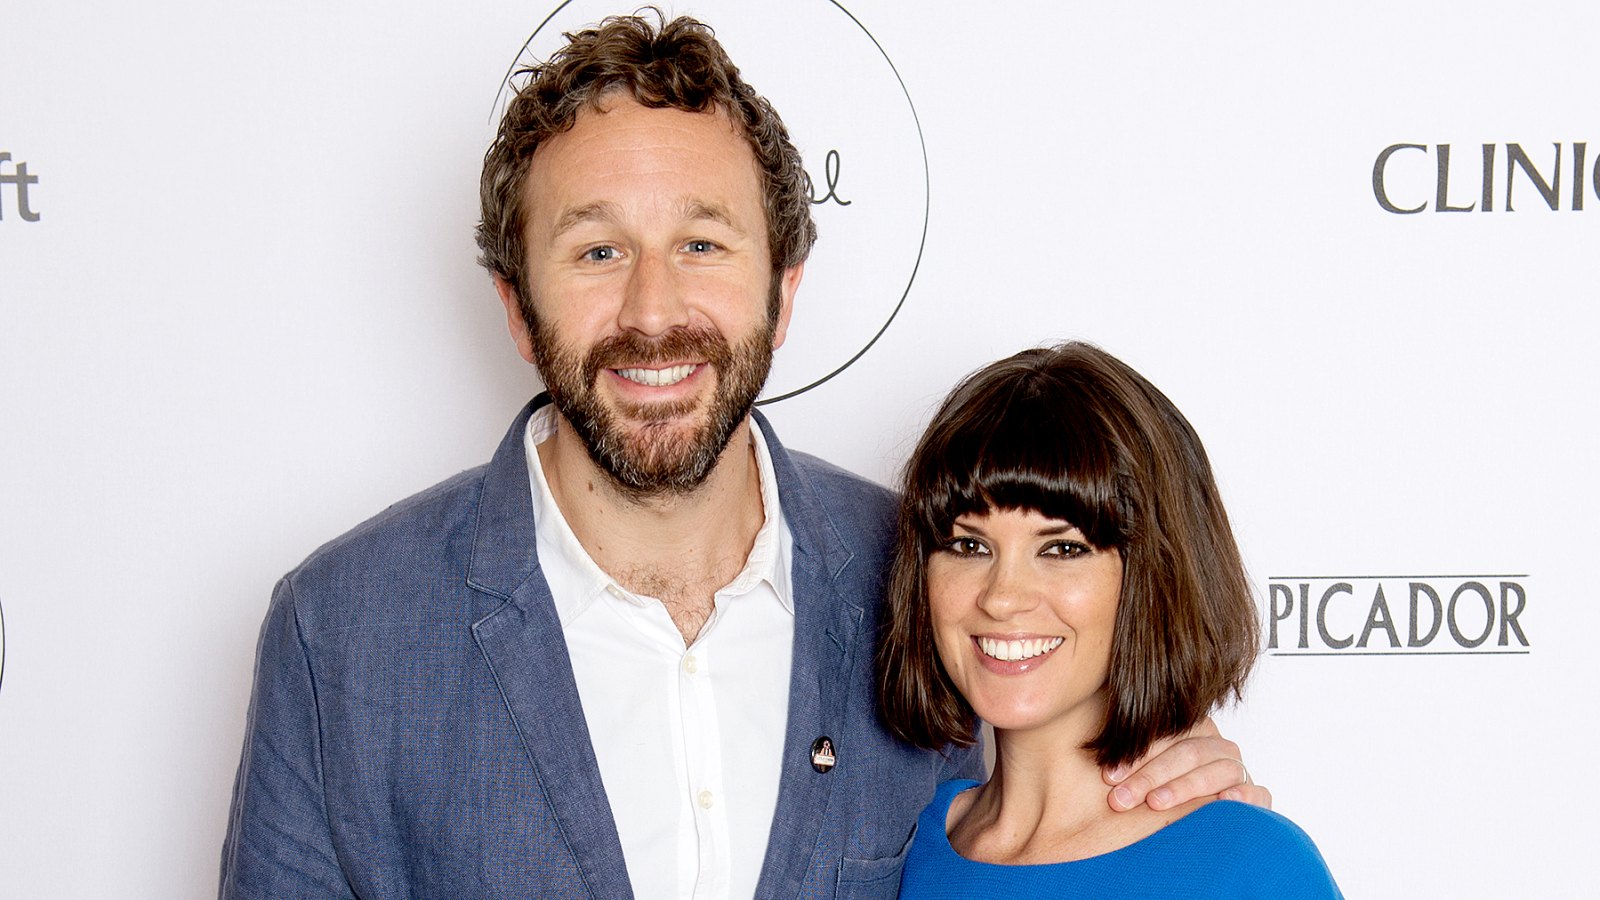 Chris O'Dowd and Dawn O'Porter attend the launch party for The Pool, a unique multi-media platform for busy women co-founded by renowned editor and journalist Sam Baker and broadcaster Lauren Laverne, on April 23, 2015 in London, England.